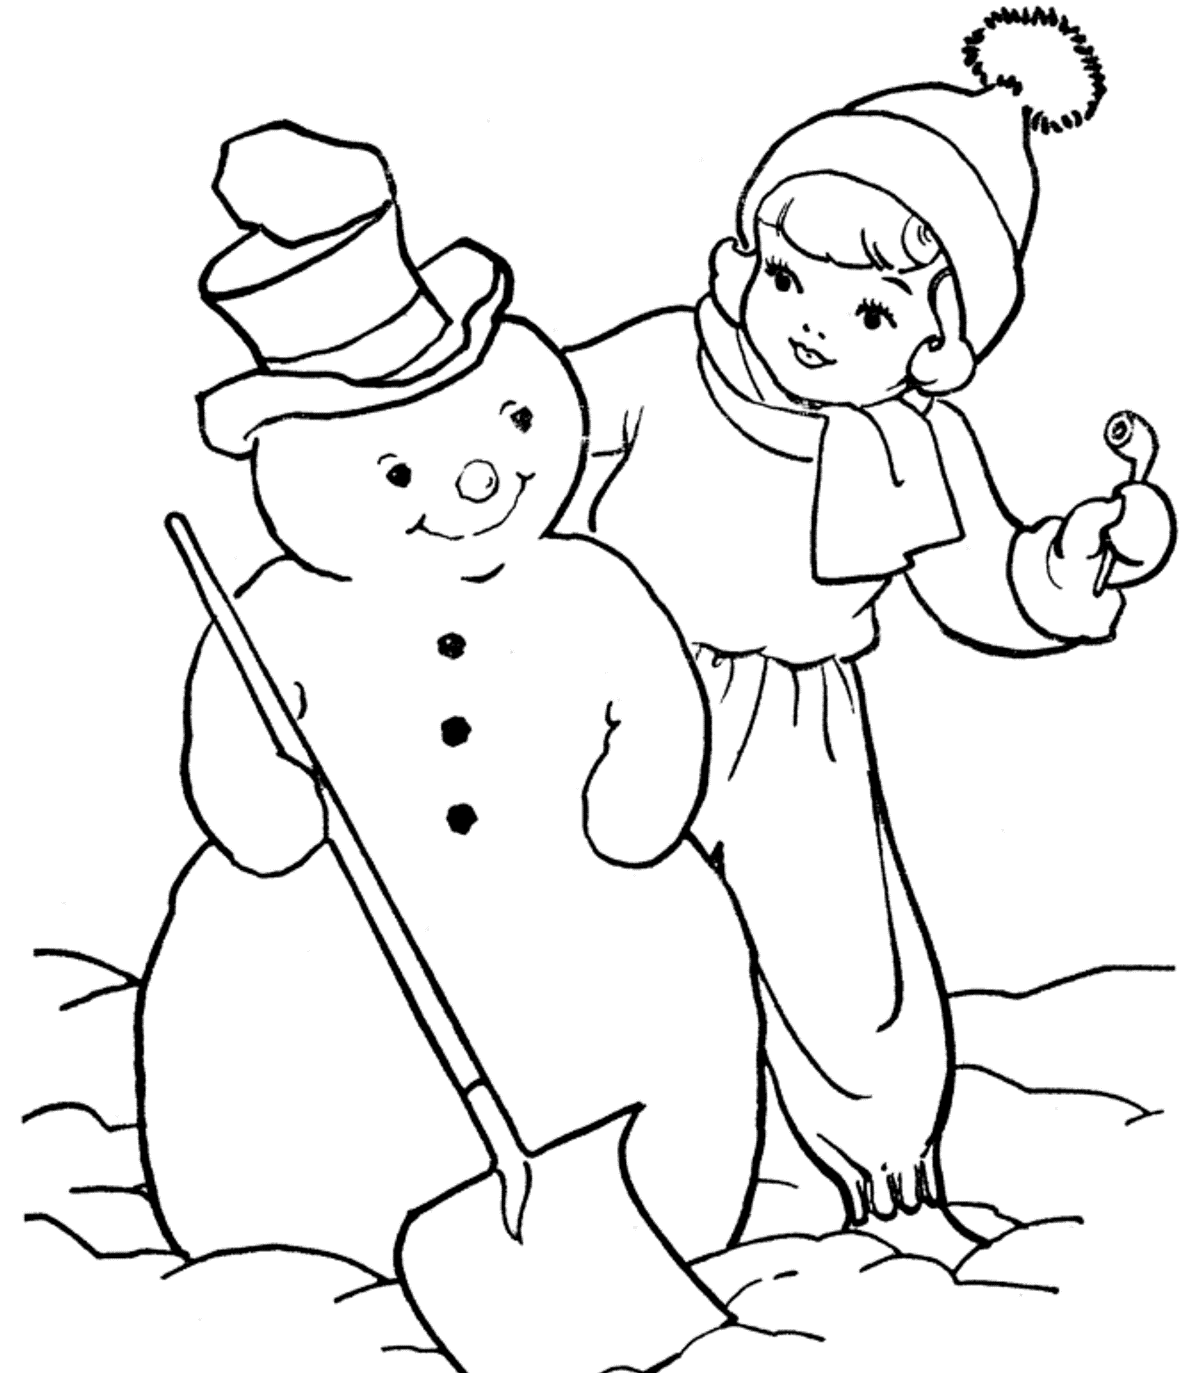 Snowman For Kids To Print Coloring Page